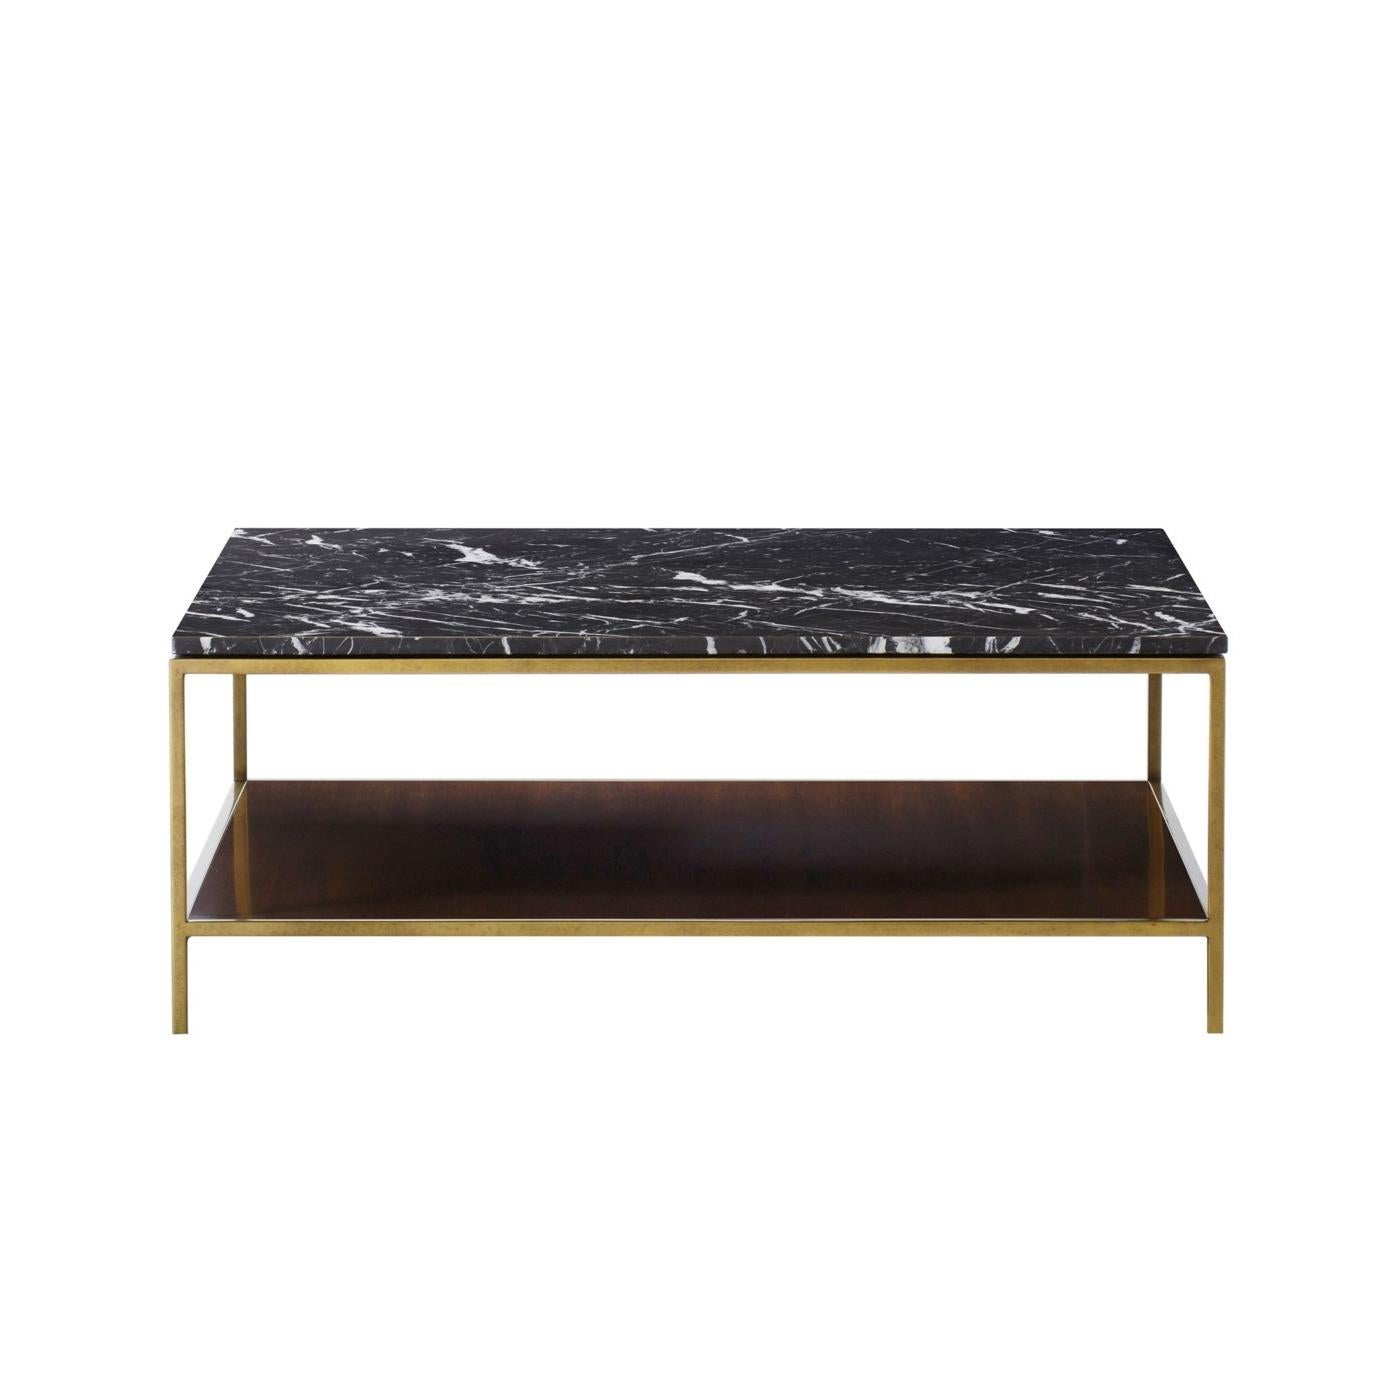 English Carolina Coffee Table with Black Marquina Marble Top For Sale